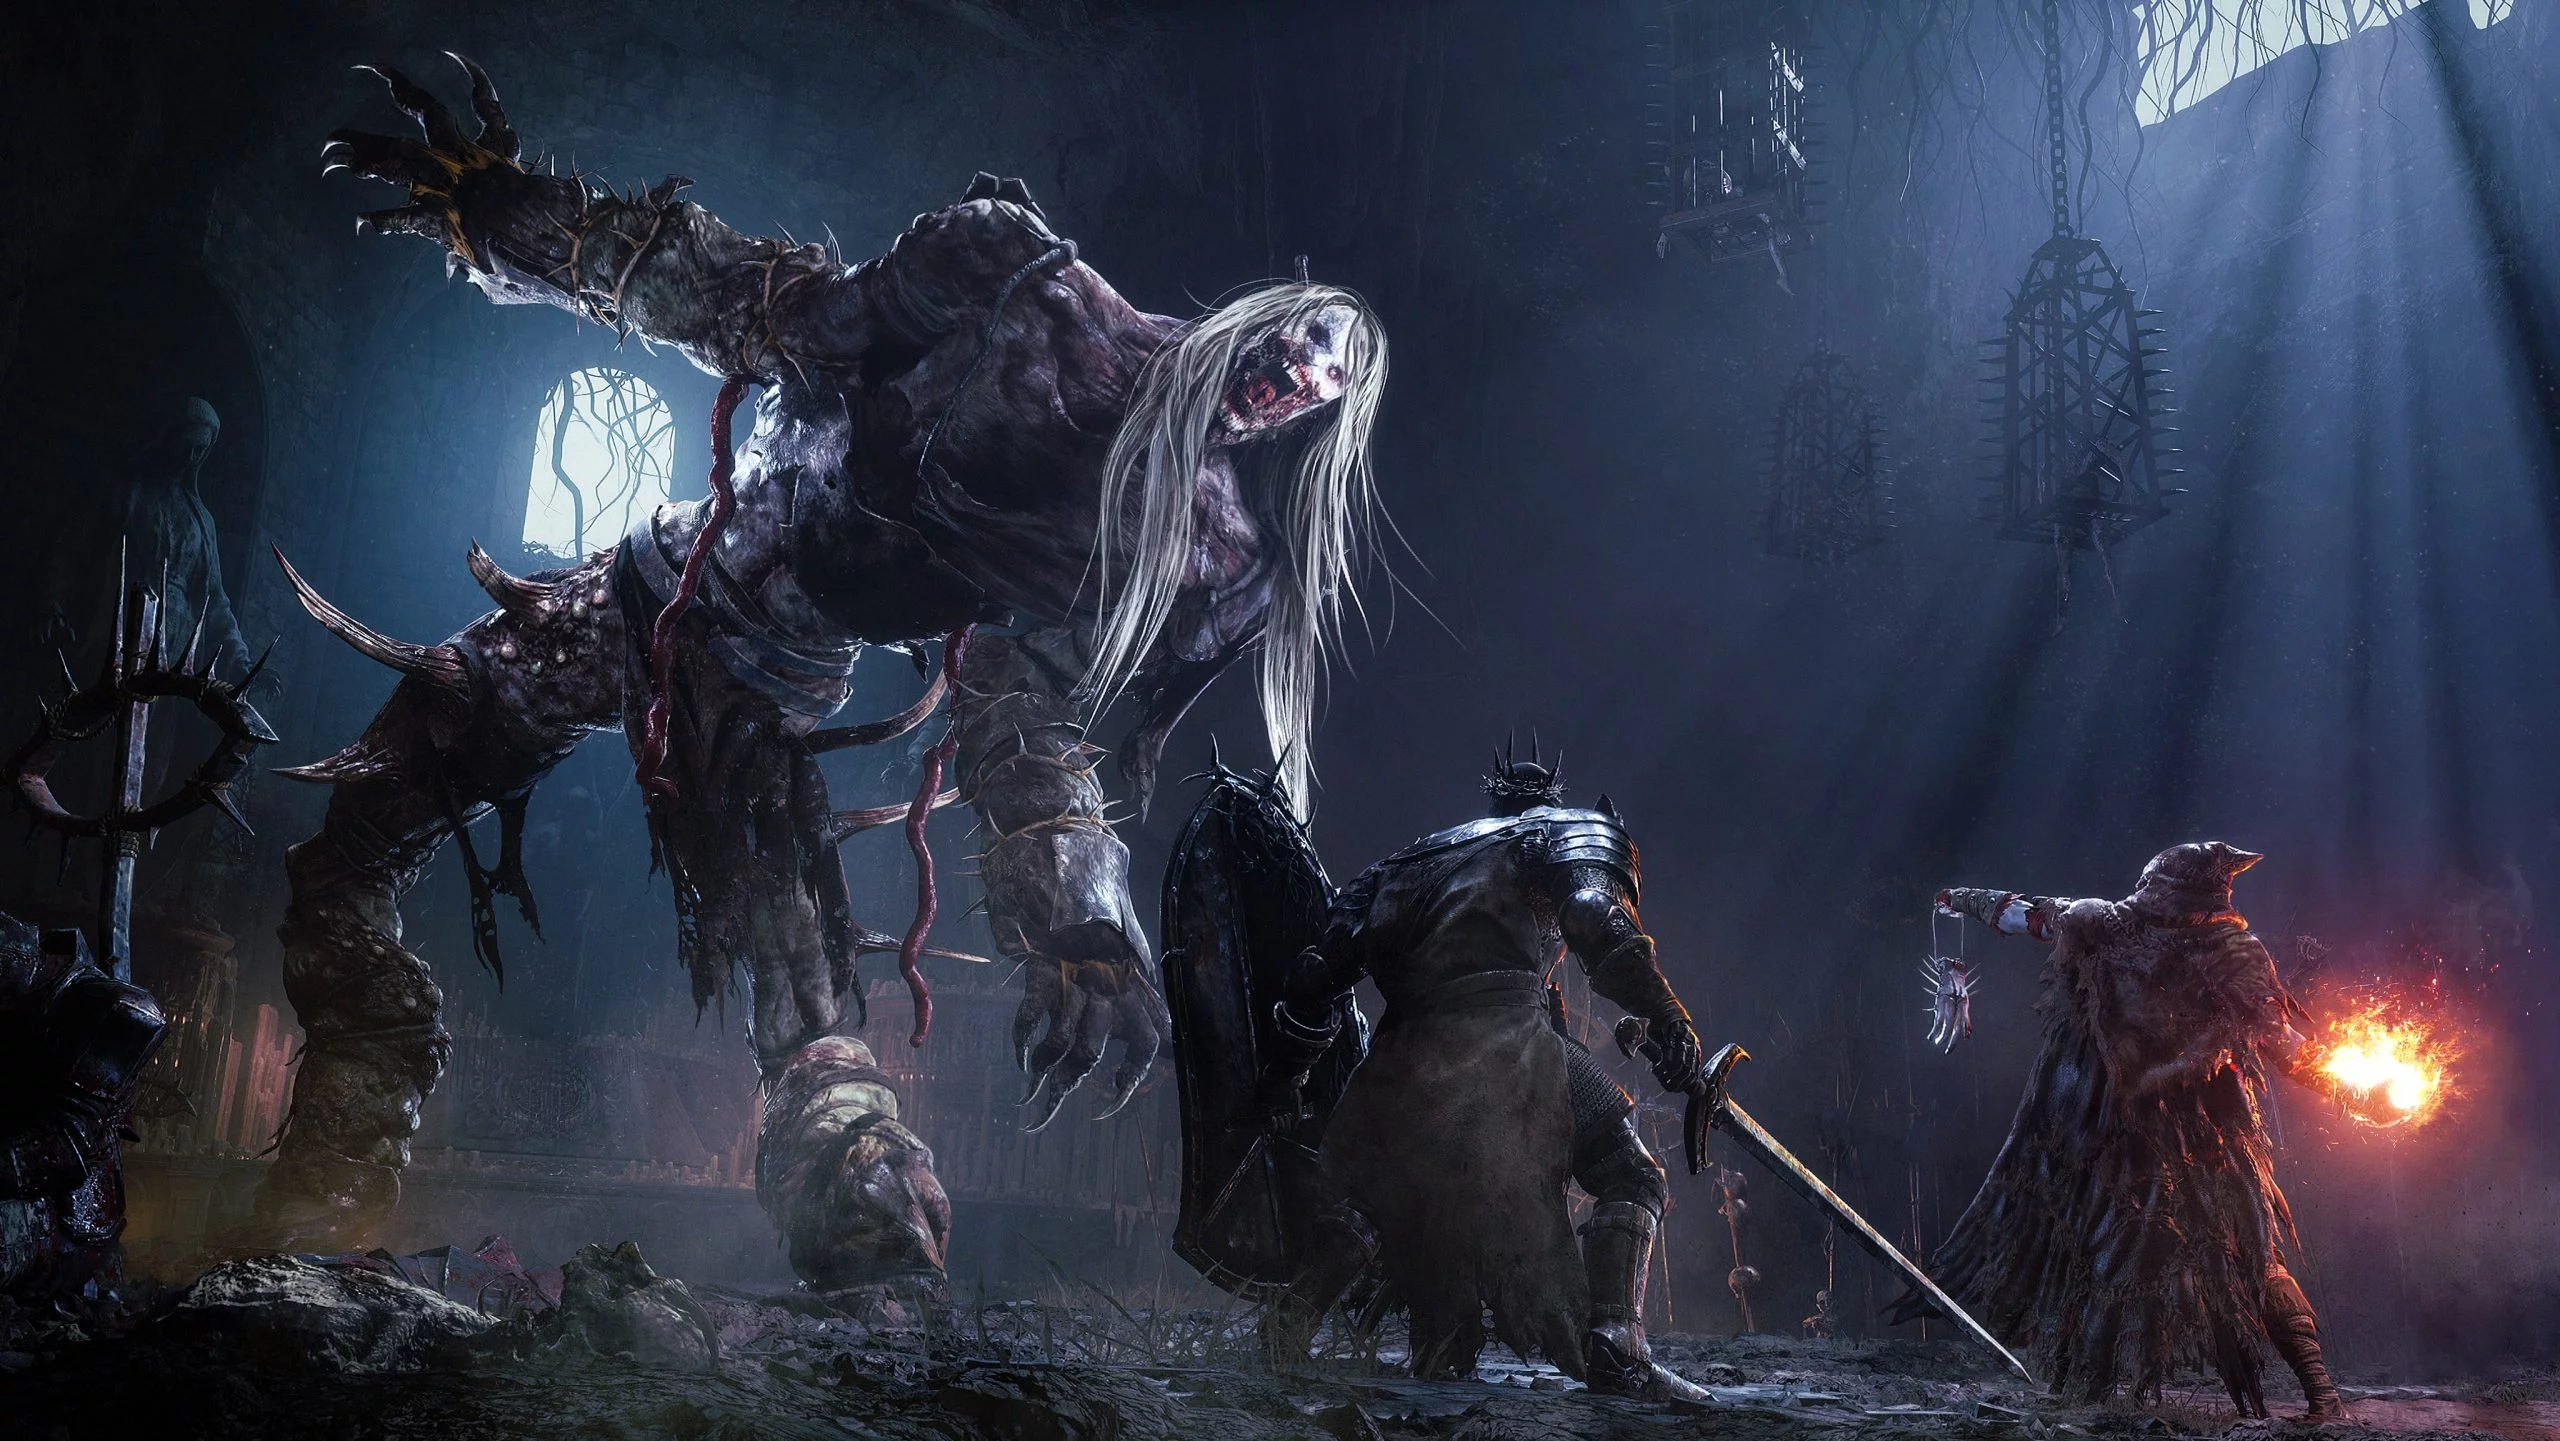 LORDS OF THE FALLEN on X: To honor your lasting loyalty, Crusader, we've  brought forth a deeper insight of the harrowing world that awaits you in  Lords of the Fallen. Pay heed